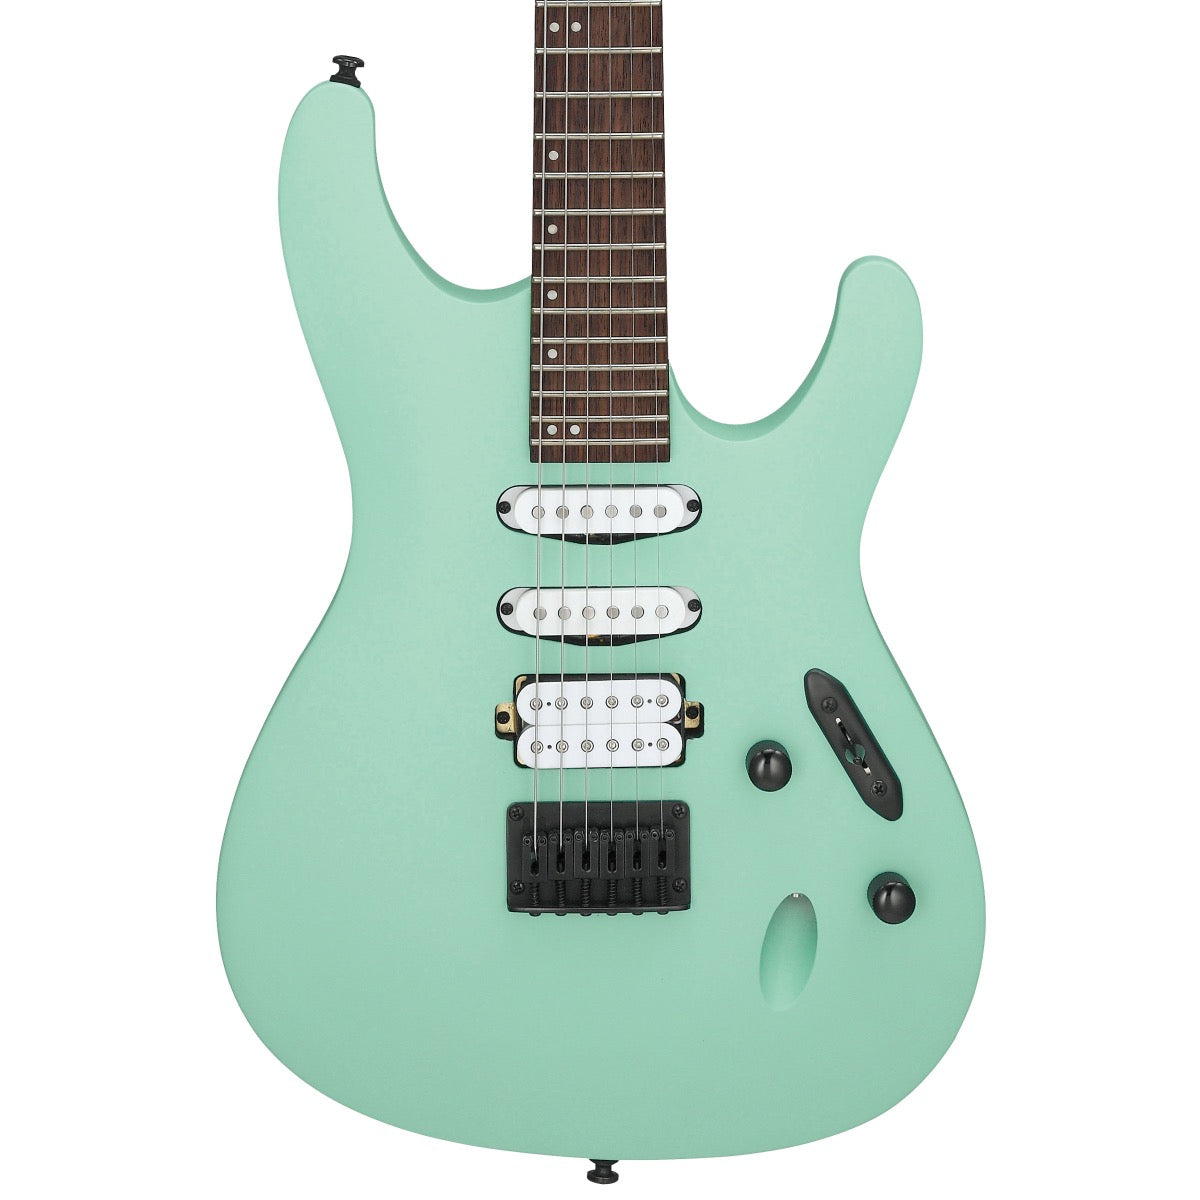 Close-up top view of Ibanez S561 S Standard Electric Guitar - Sea Foam Green showing body and portion of fingerboard